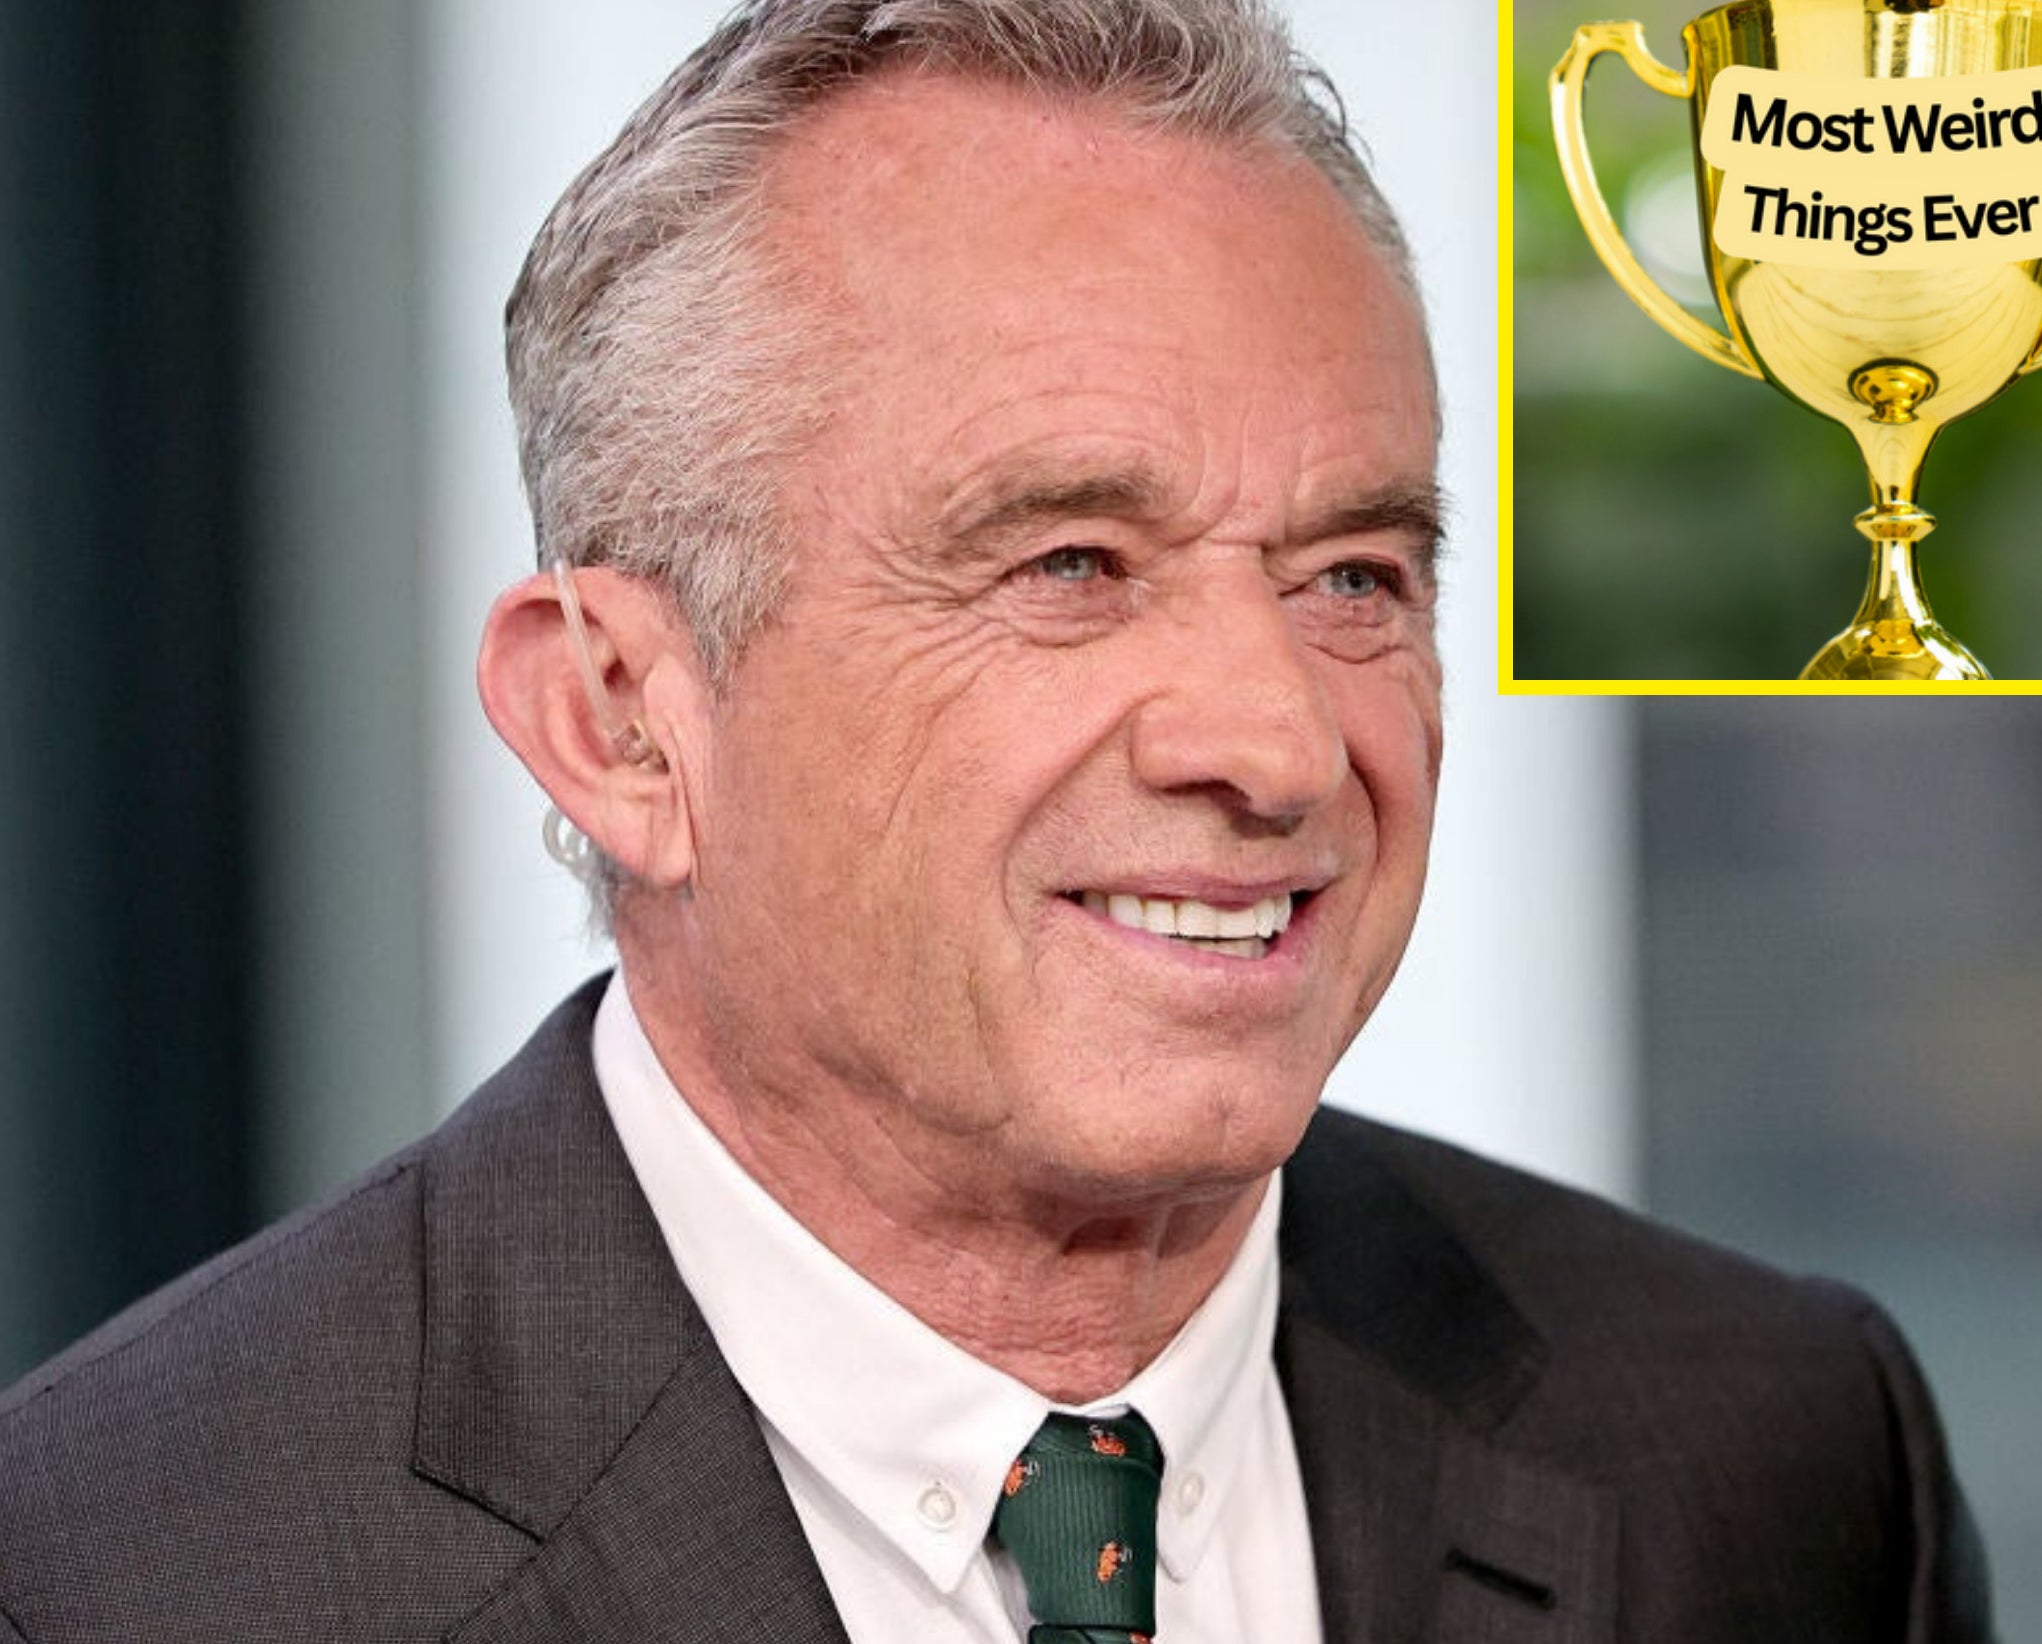 A closeup of RFK Jr. with an inset image of a trophy